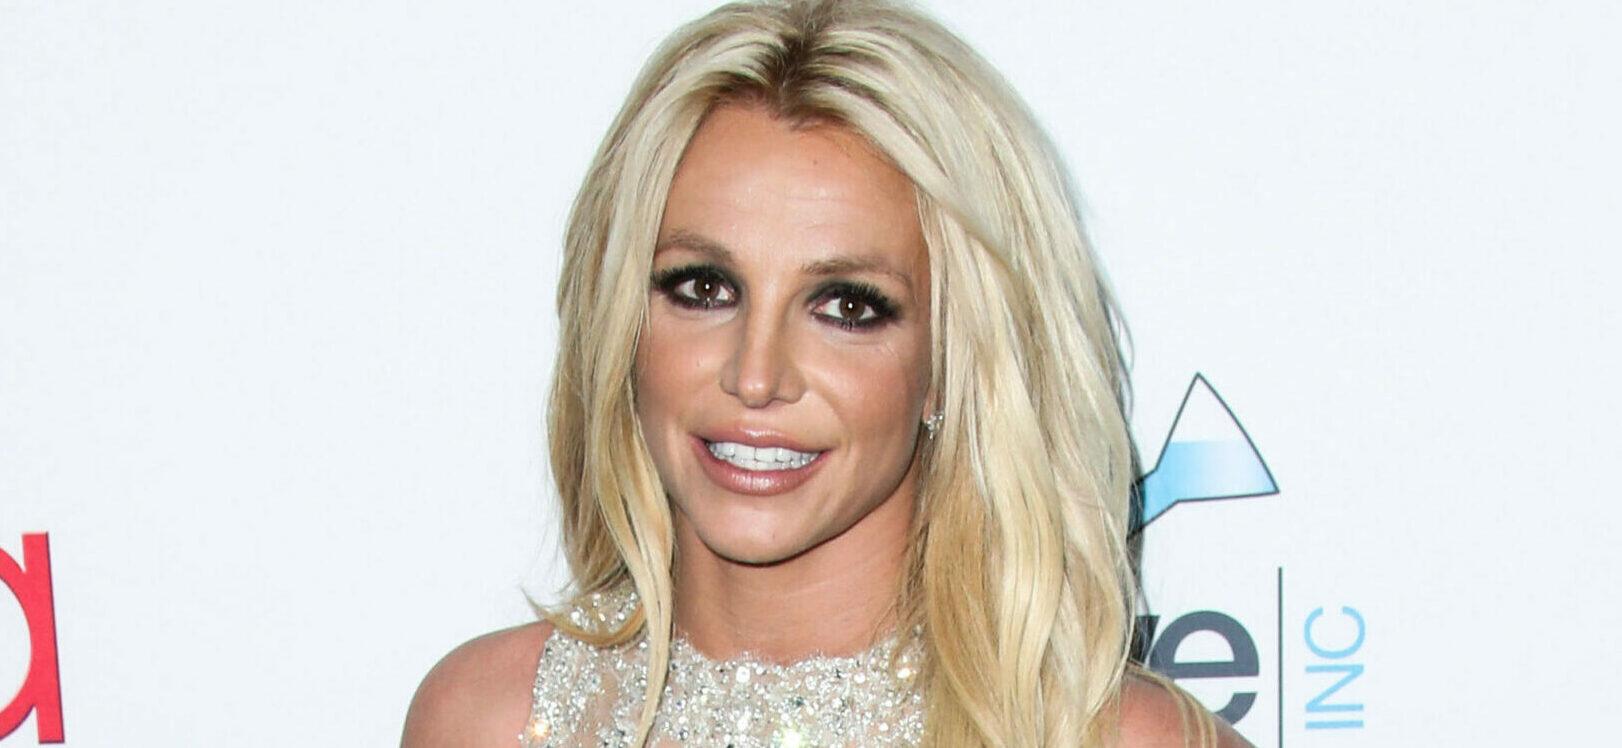 Britney Spears Follows Up Poolside Bikini Videos With White Dress Throwback